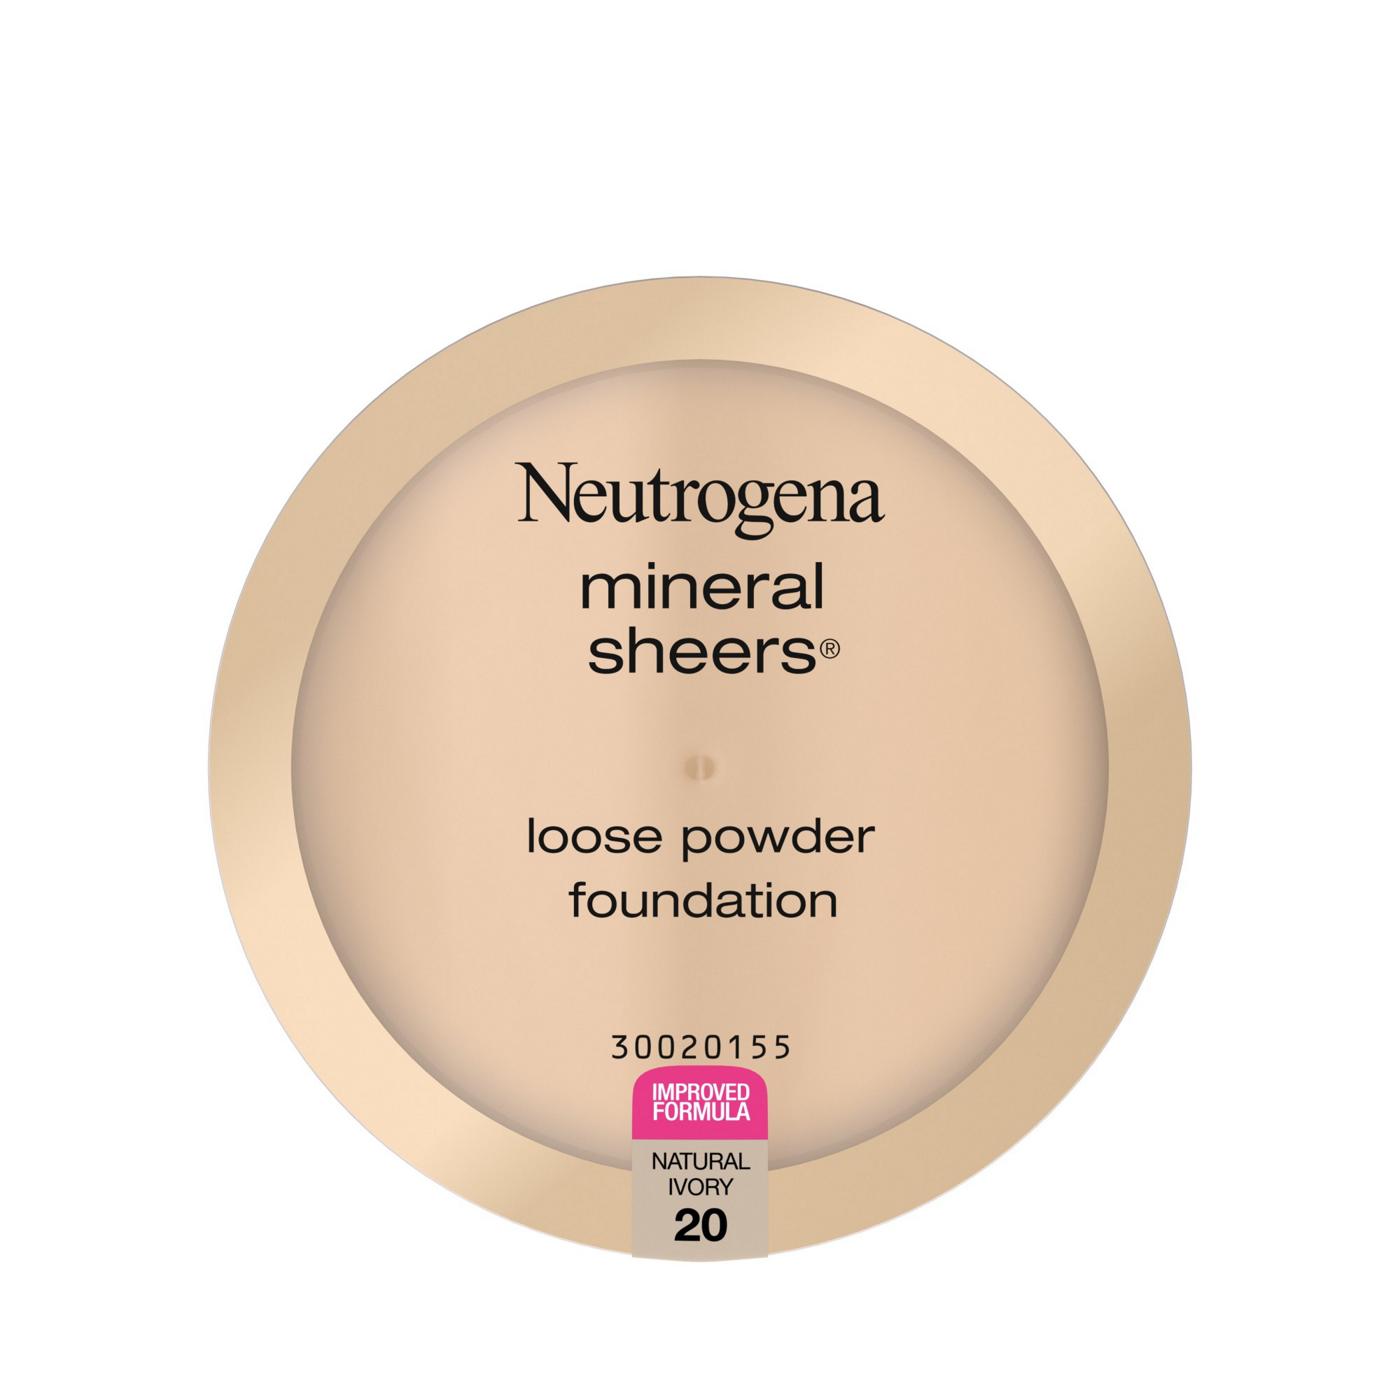 Neutrogena Mineral Sheers Loose Powder Foundation 20 Natural Ivory; image 1 of 6